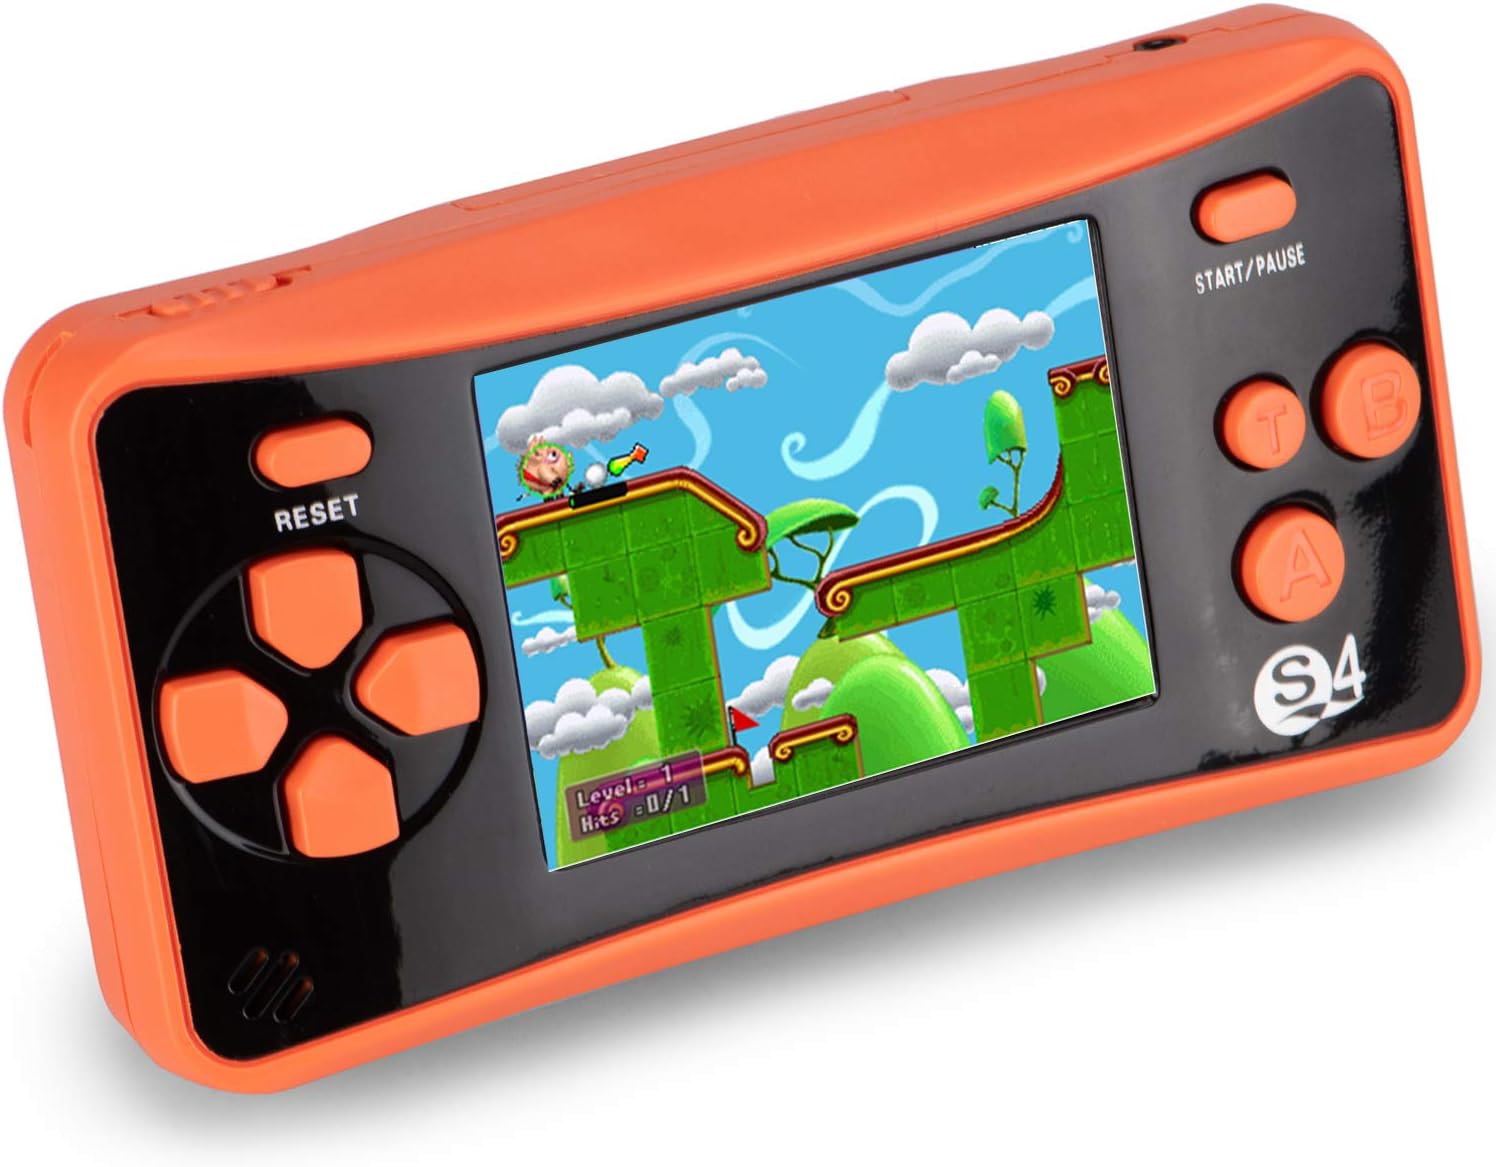 HigoKids Handheld Game for Kids Portable Retro Video Game Player Built-in 182 Classic Games 2.5 inches LCD Screen Family Recreation Arcade Gaming Form Birthday Present for Children-Rose red